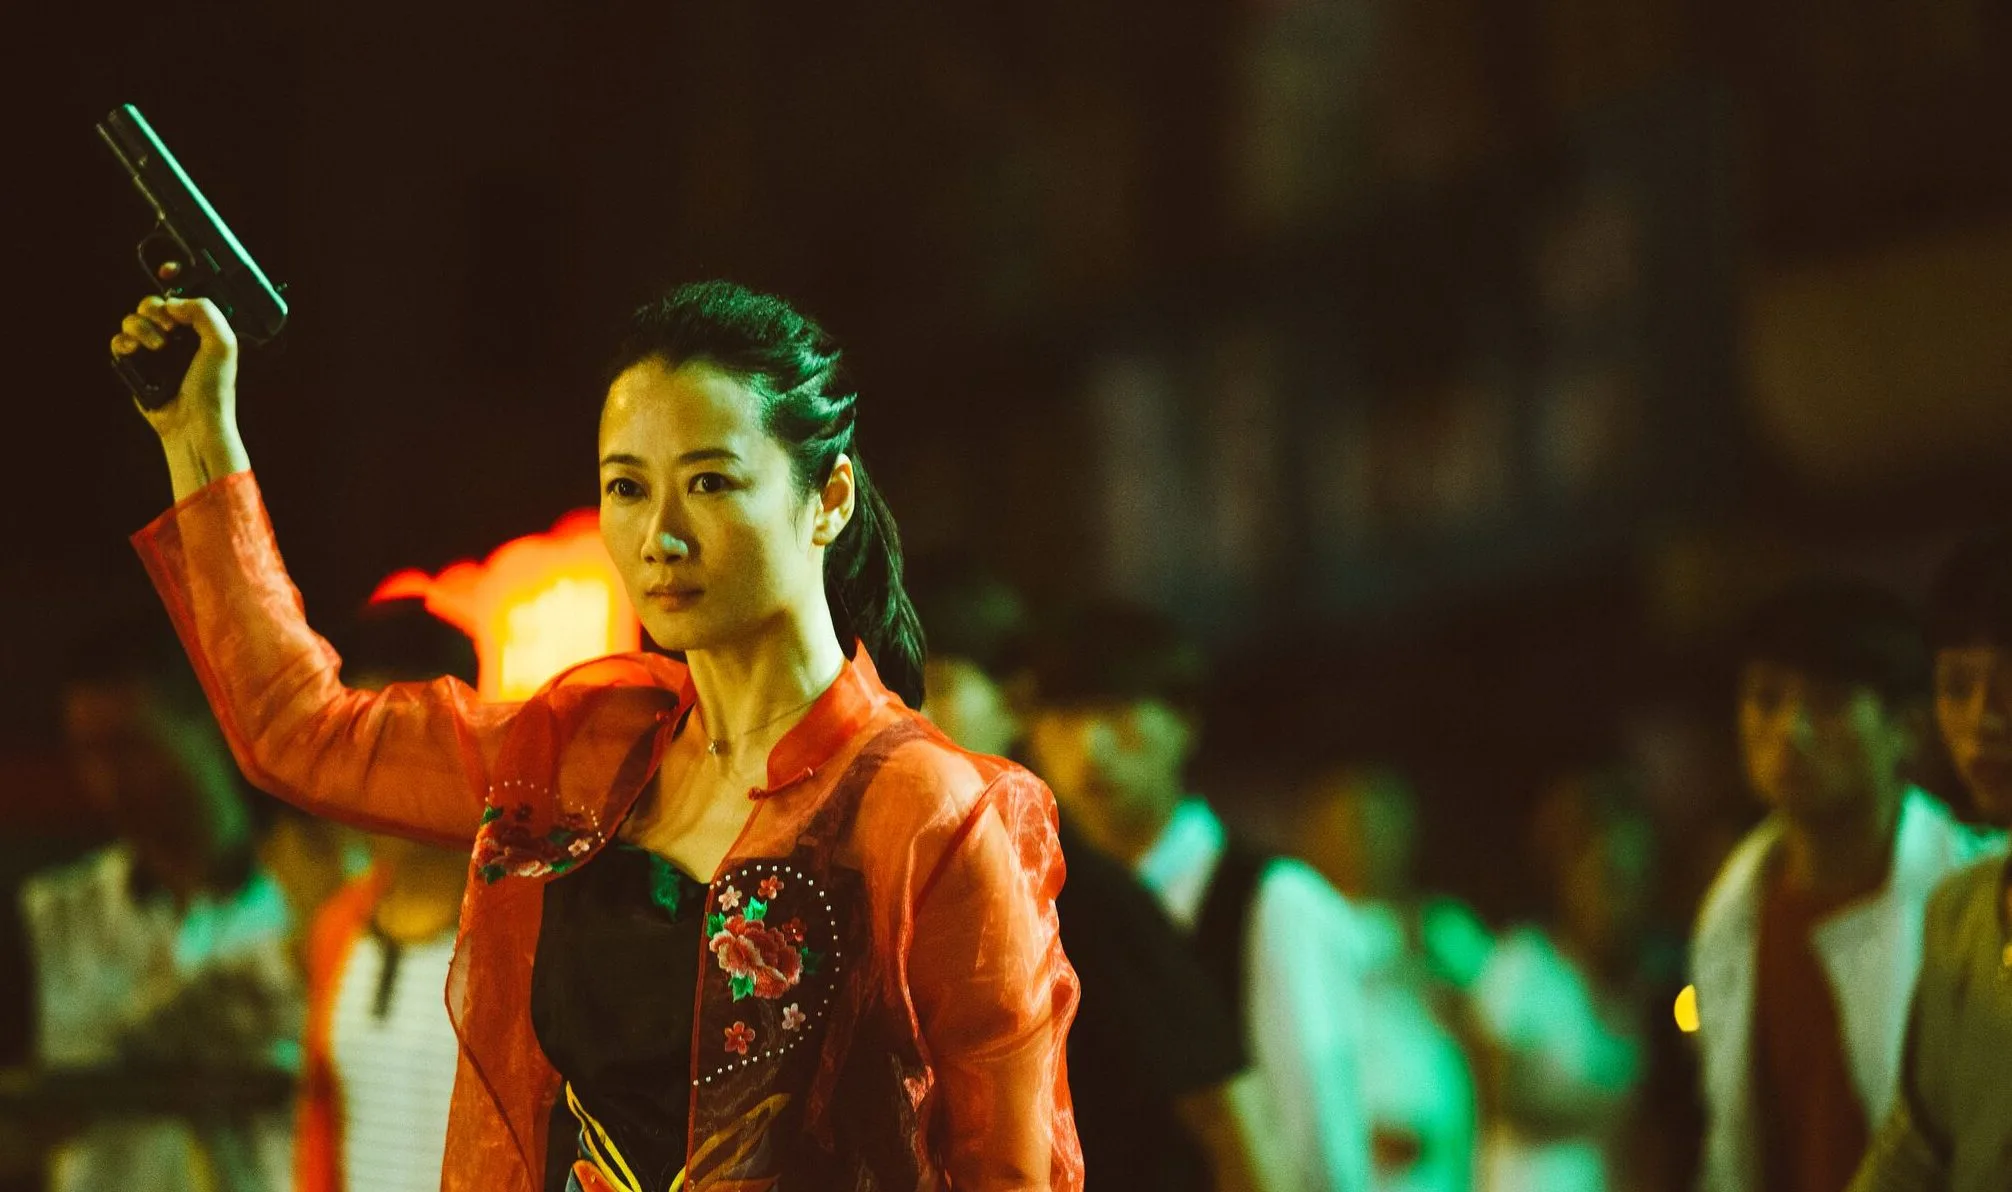 Ash Is Purest White (Jia Zhangke, 2019)